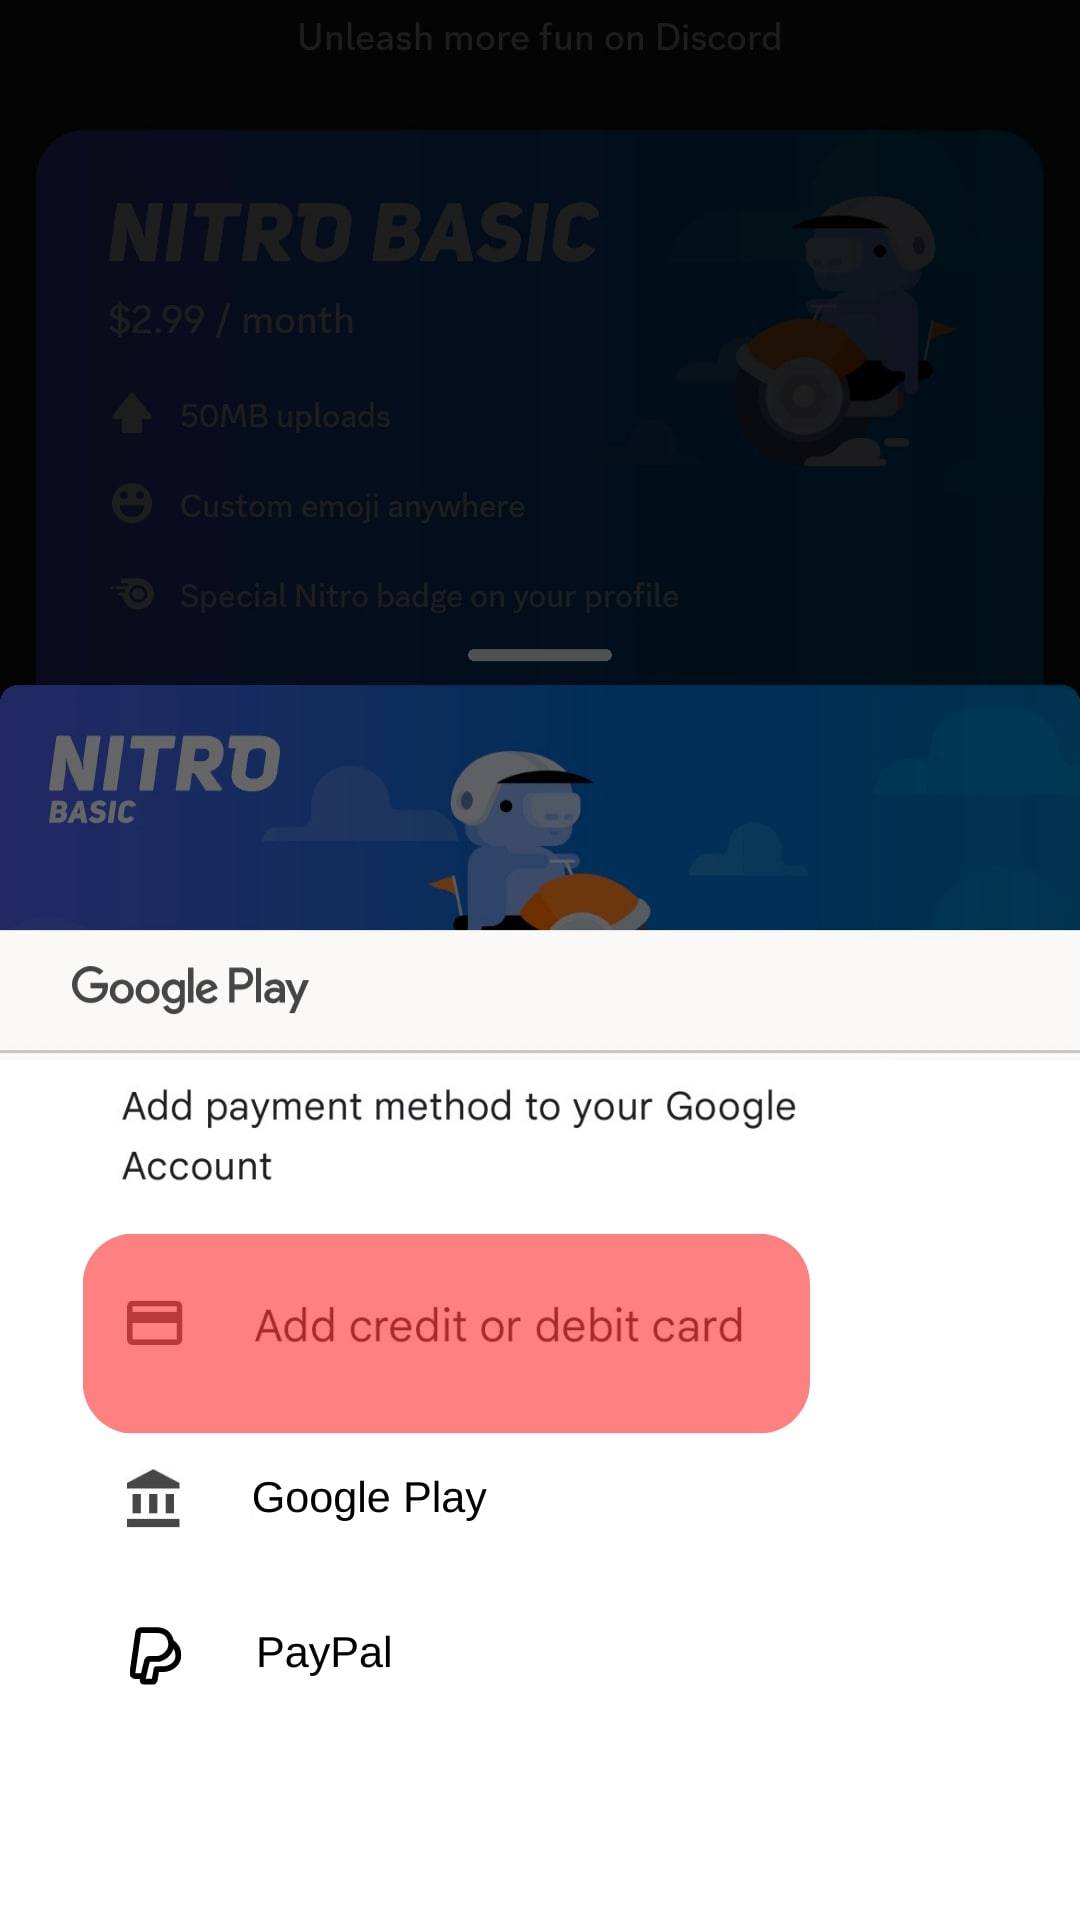 Click The “Add Credit Or Debit Card” And Enter The Card’s Details.